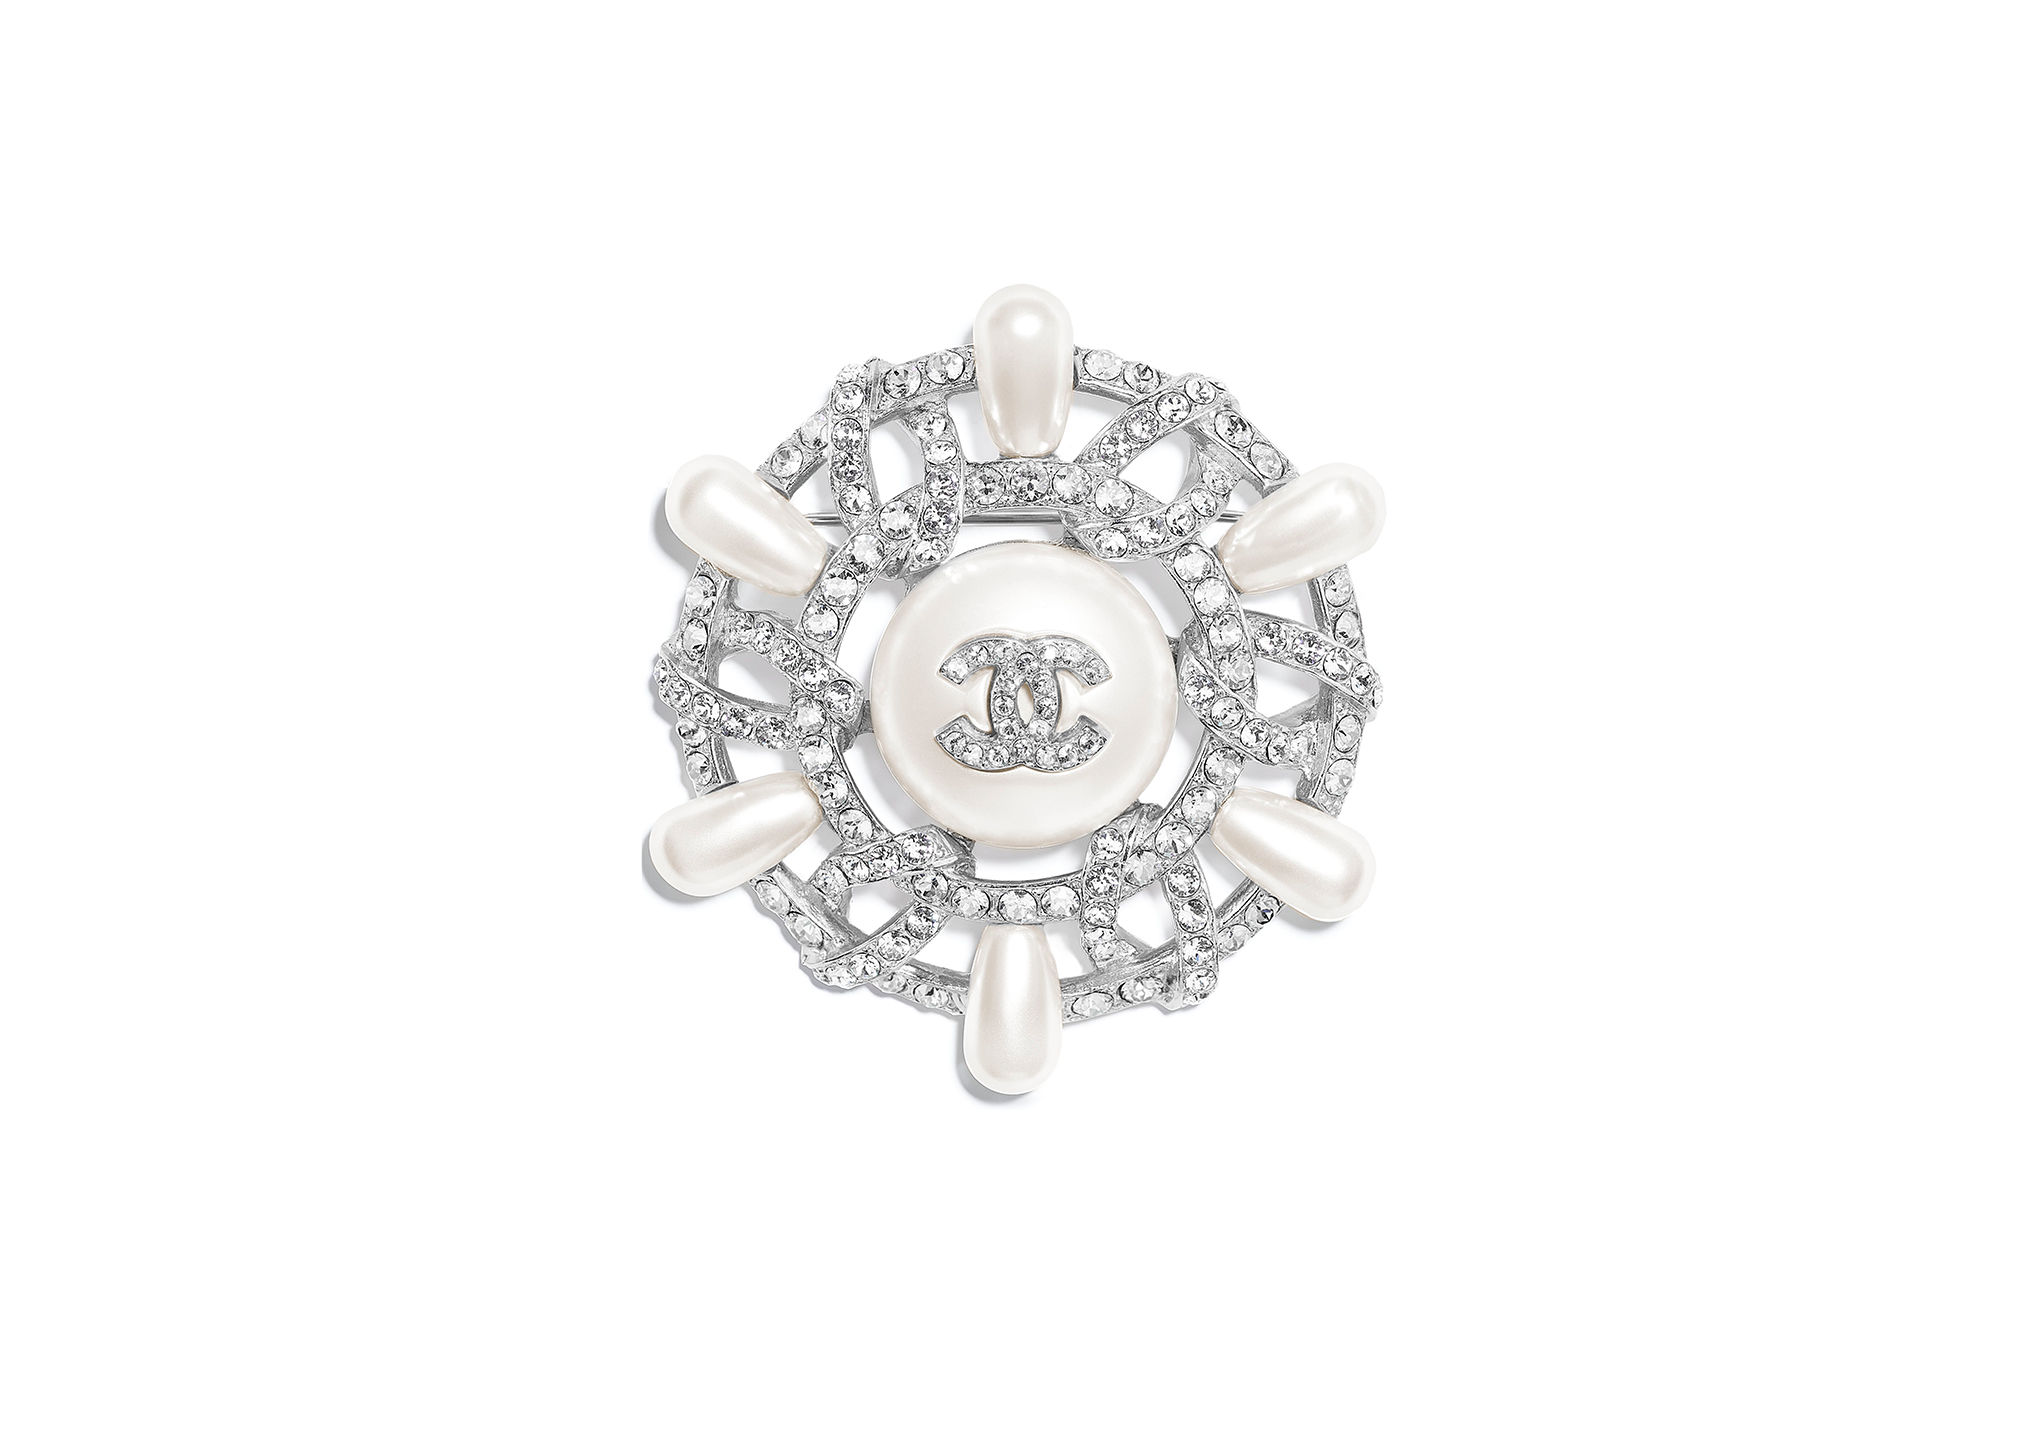 35 nautical, fantastical accessories from the new Chanel Métiers d'Art  collection